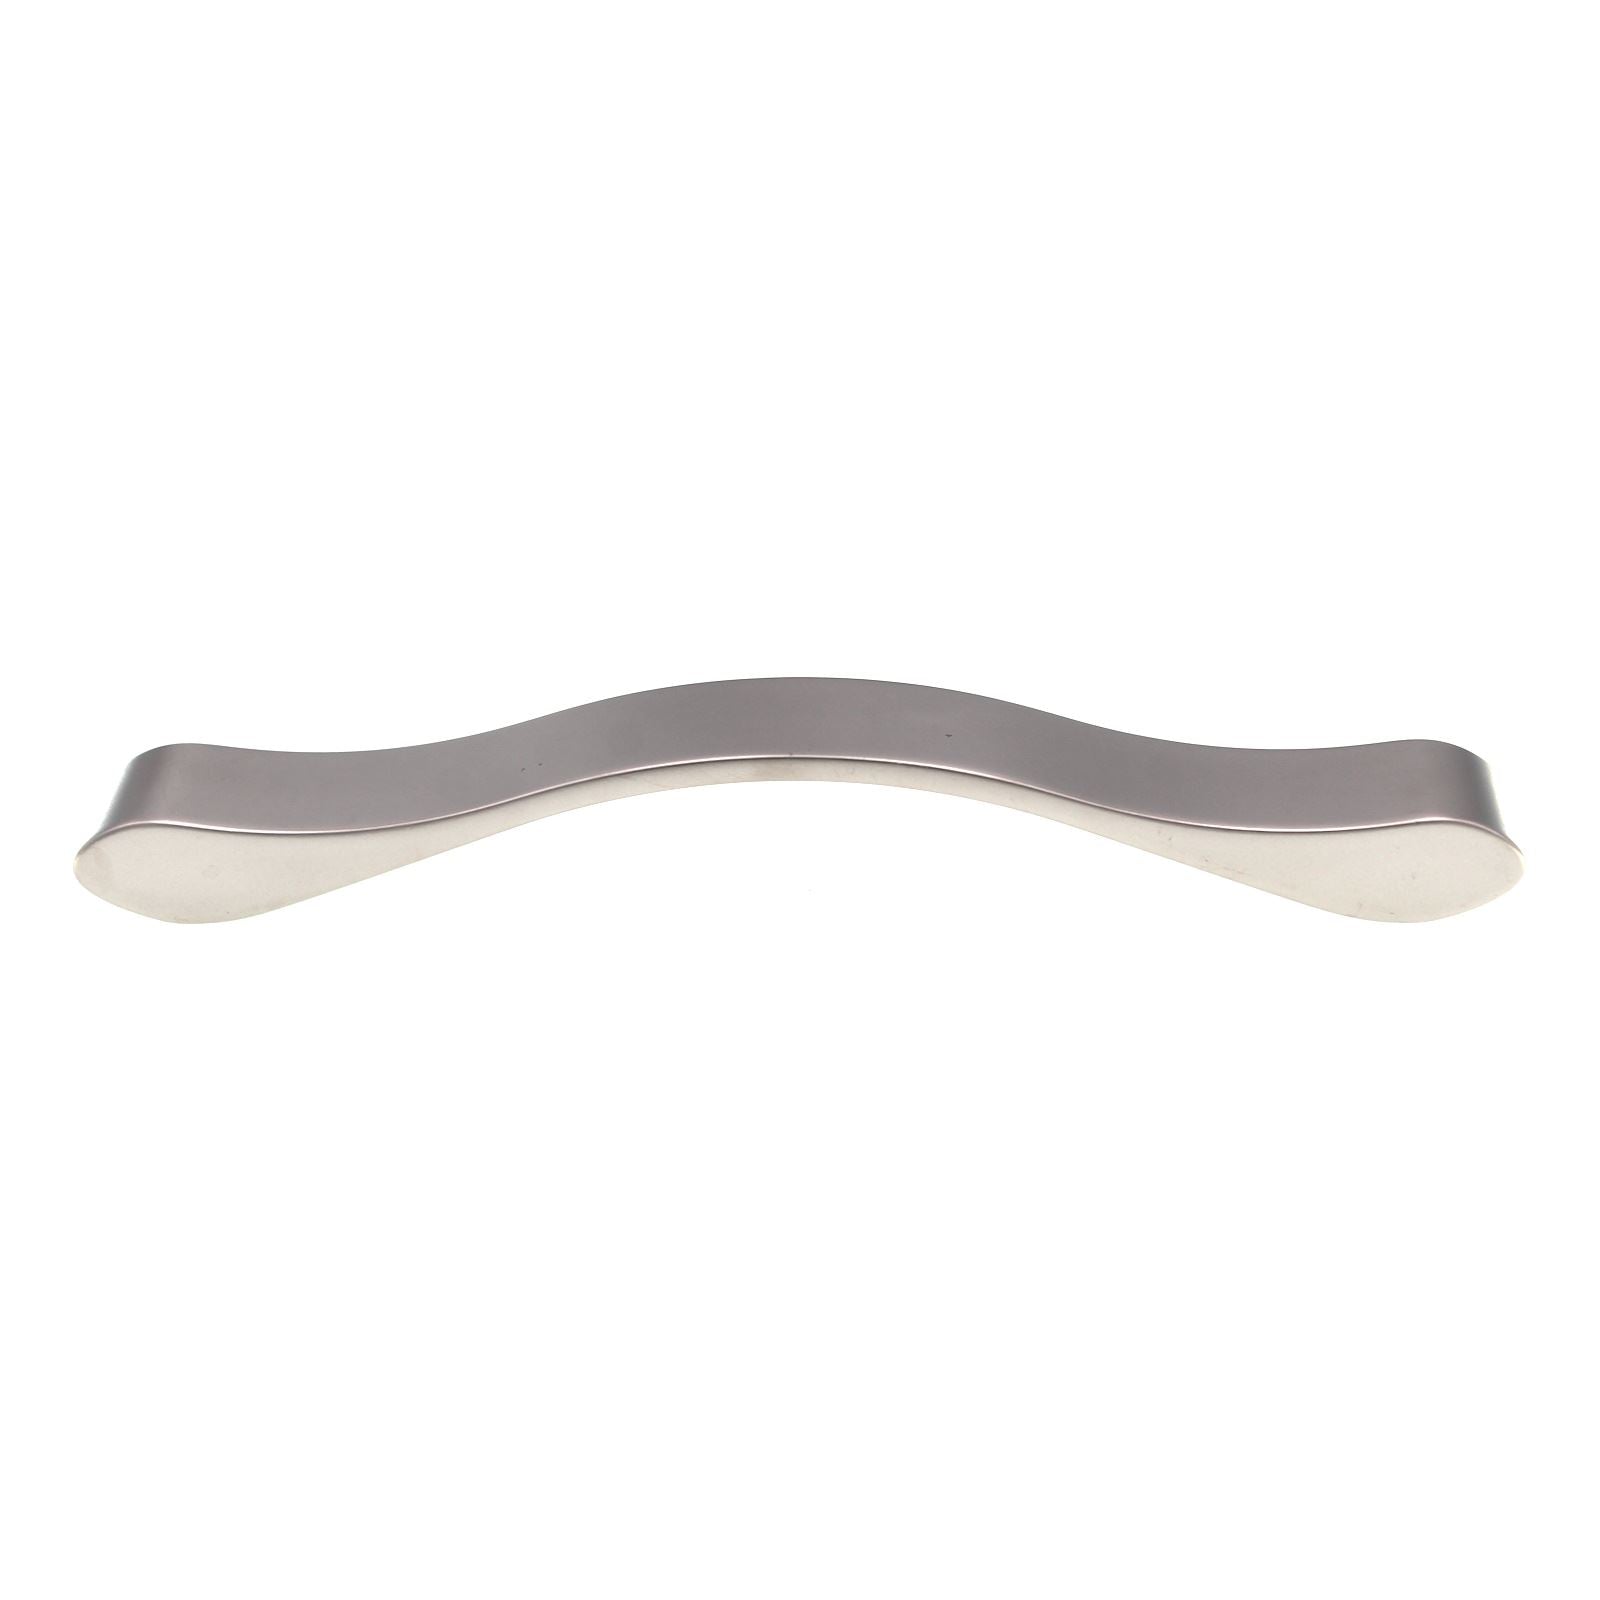 Schaub And Company Wave Cabinet Pull 6 1/4" (160mm) Ctr Satin Nickel 244-160-15